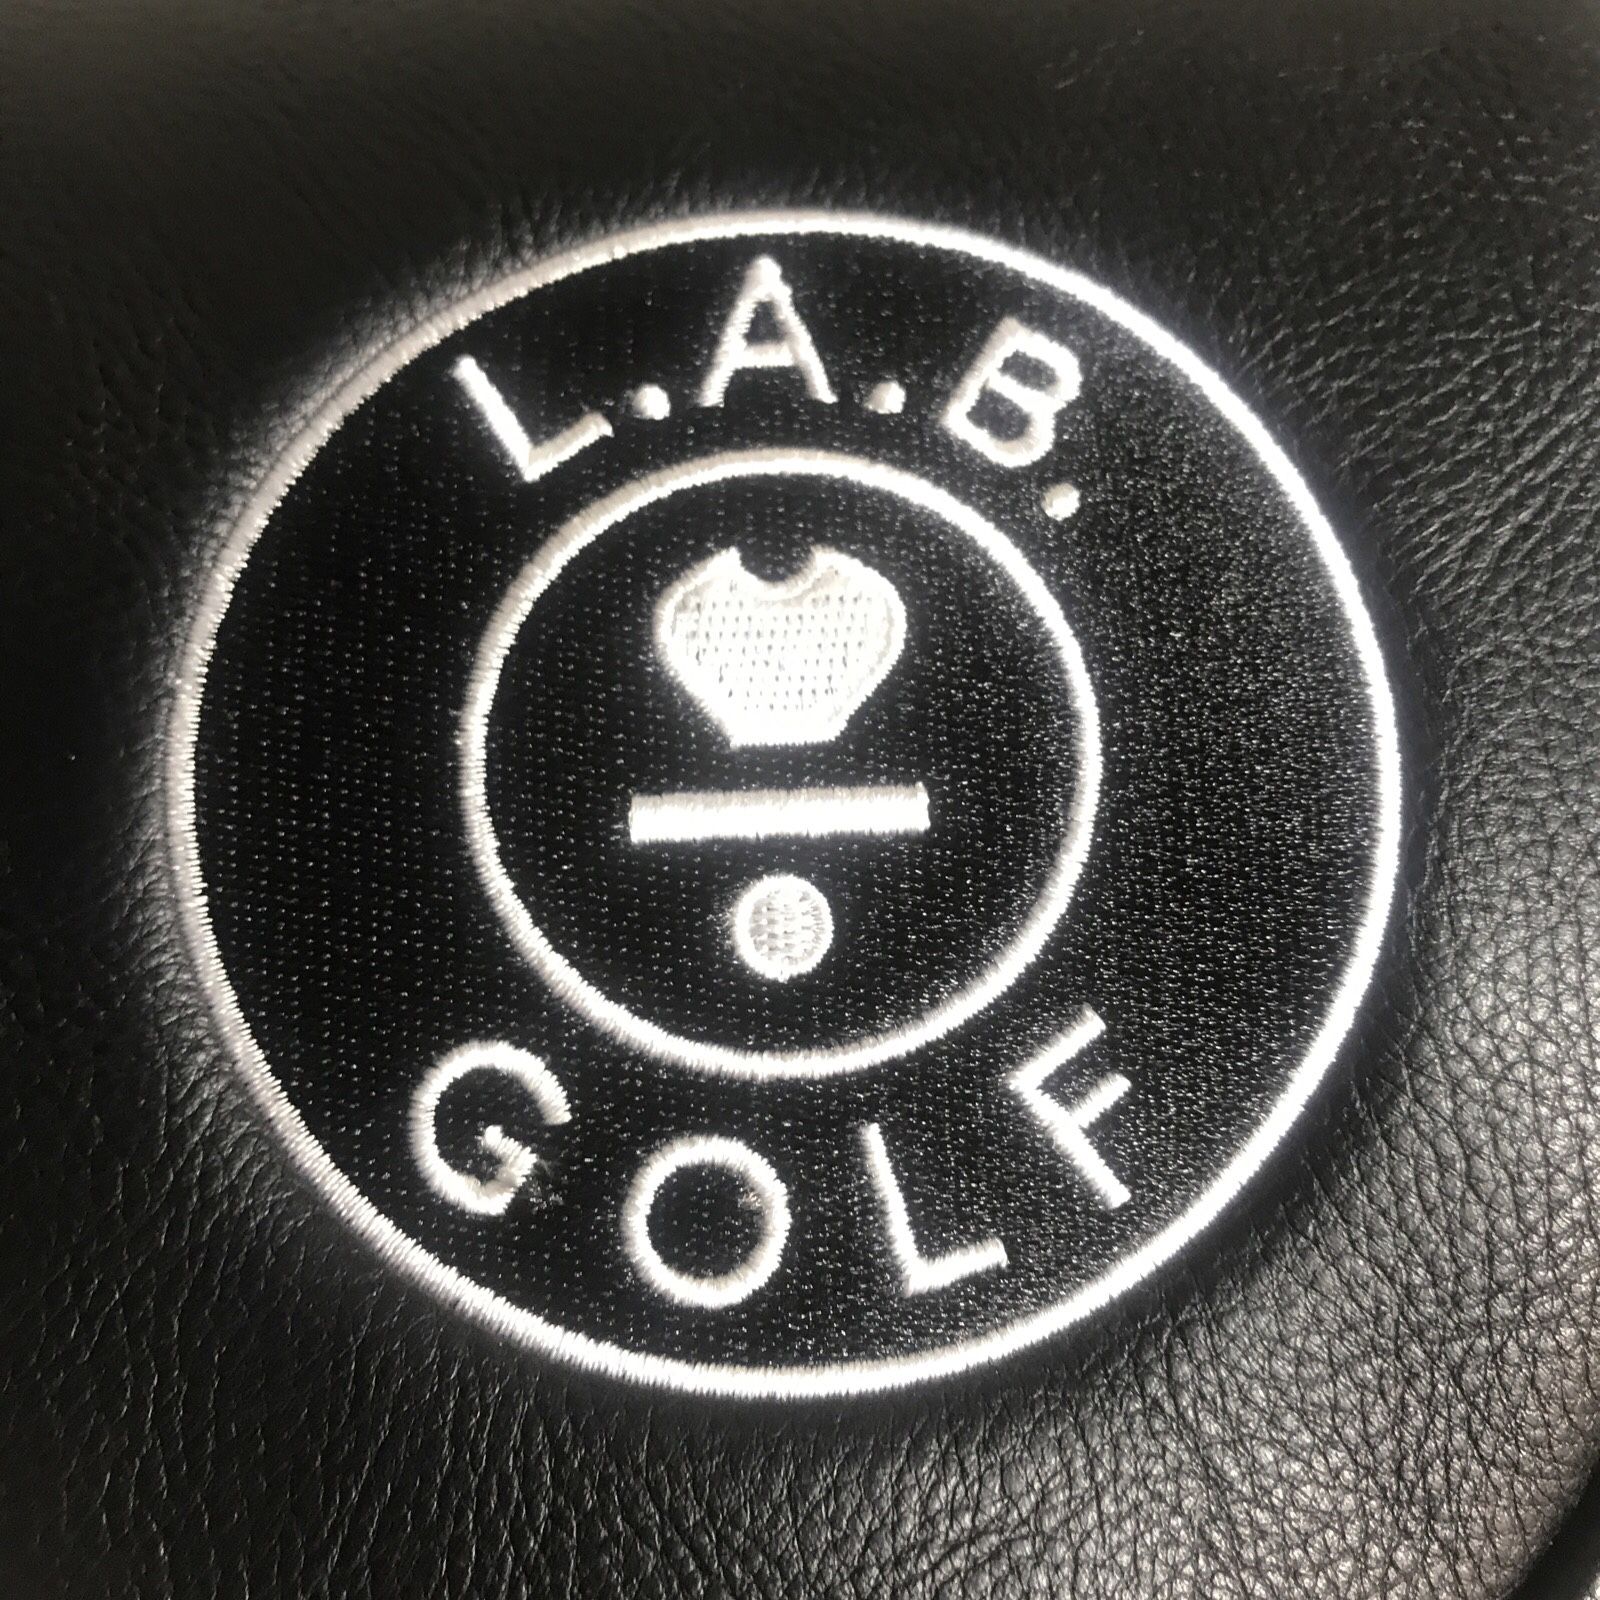 L.A.B. Golf Directed Force Mallet, Putter Head Cover, BLK. w/ Magnetic Closure